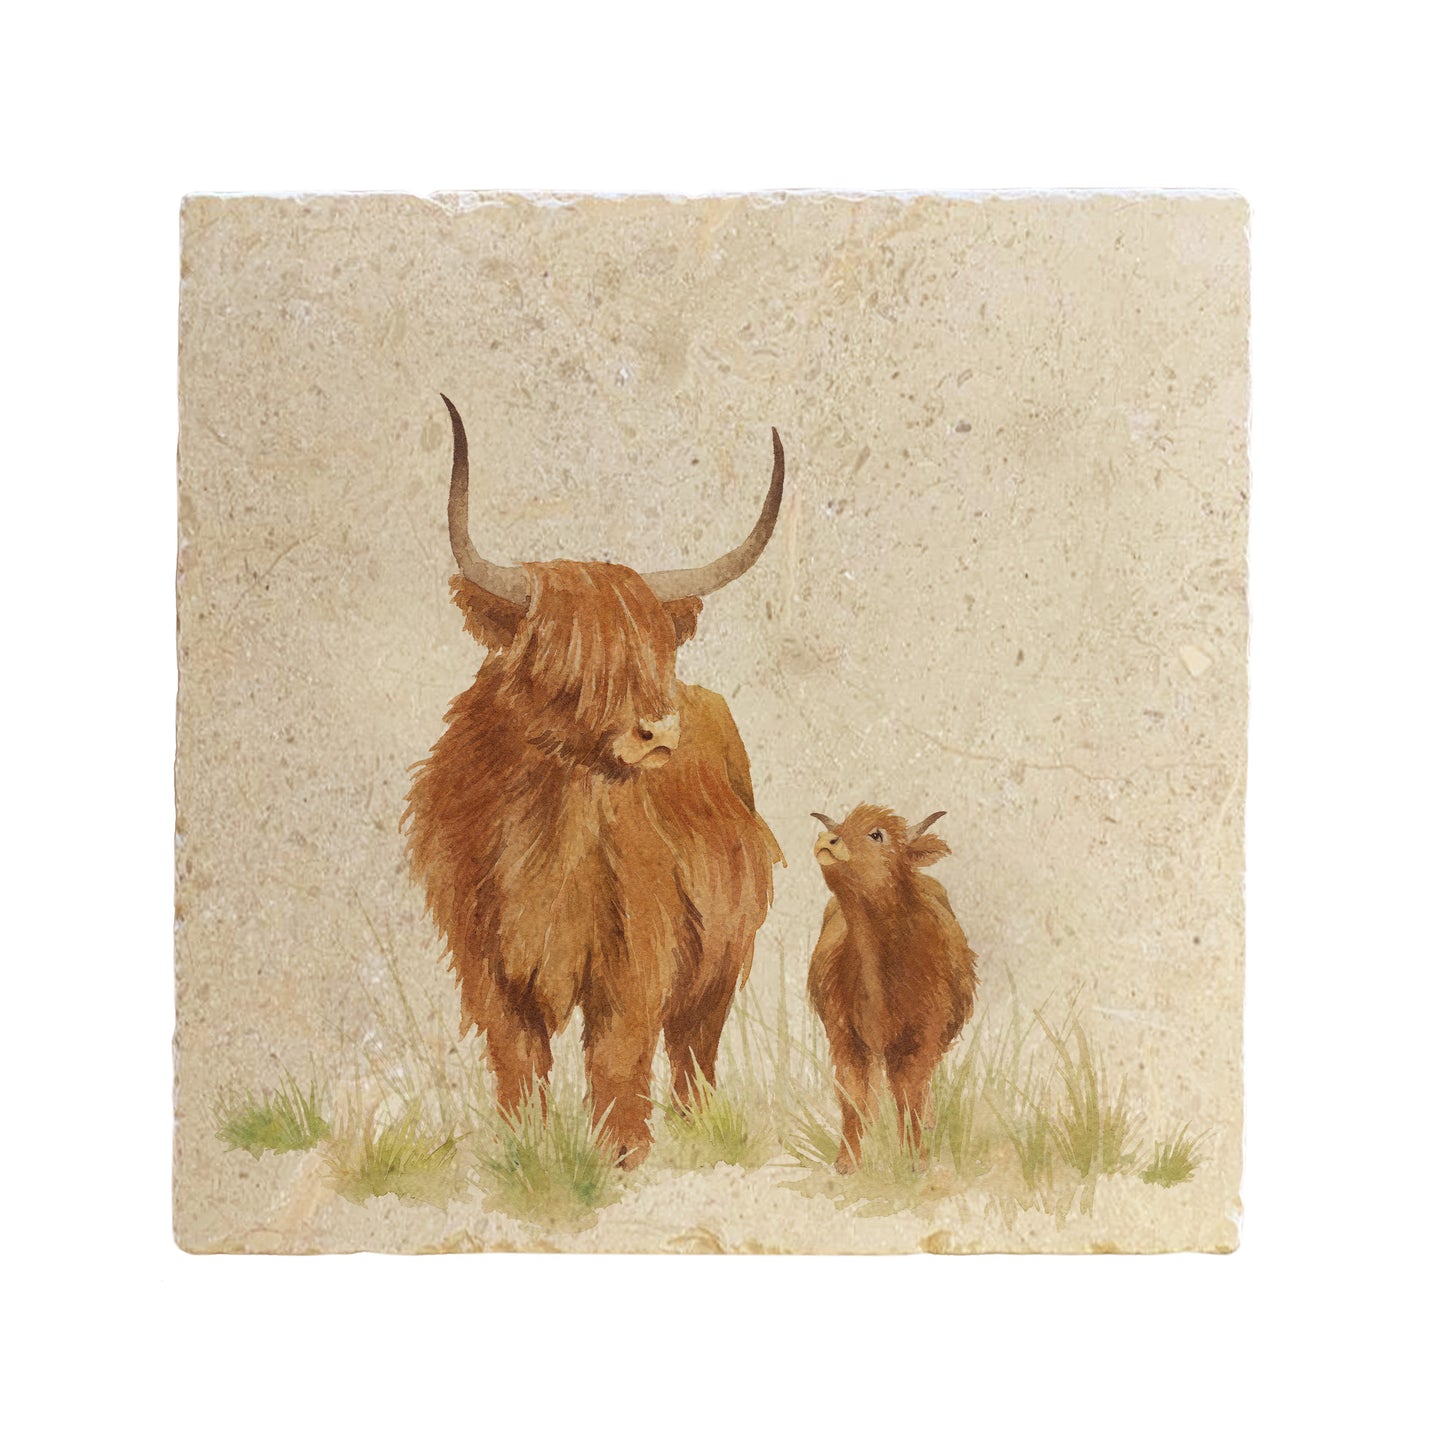 A large square multipurpose marble platter, featuring a watercolour design of a highland cow and calf in a grassy field.